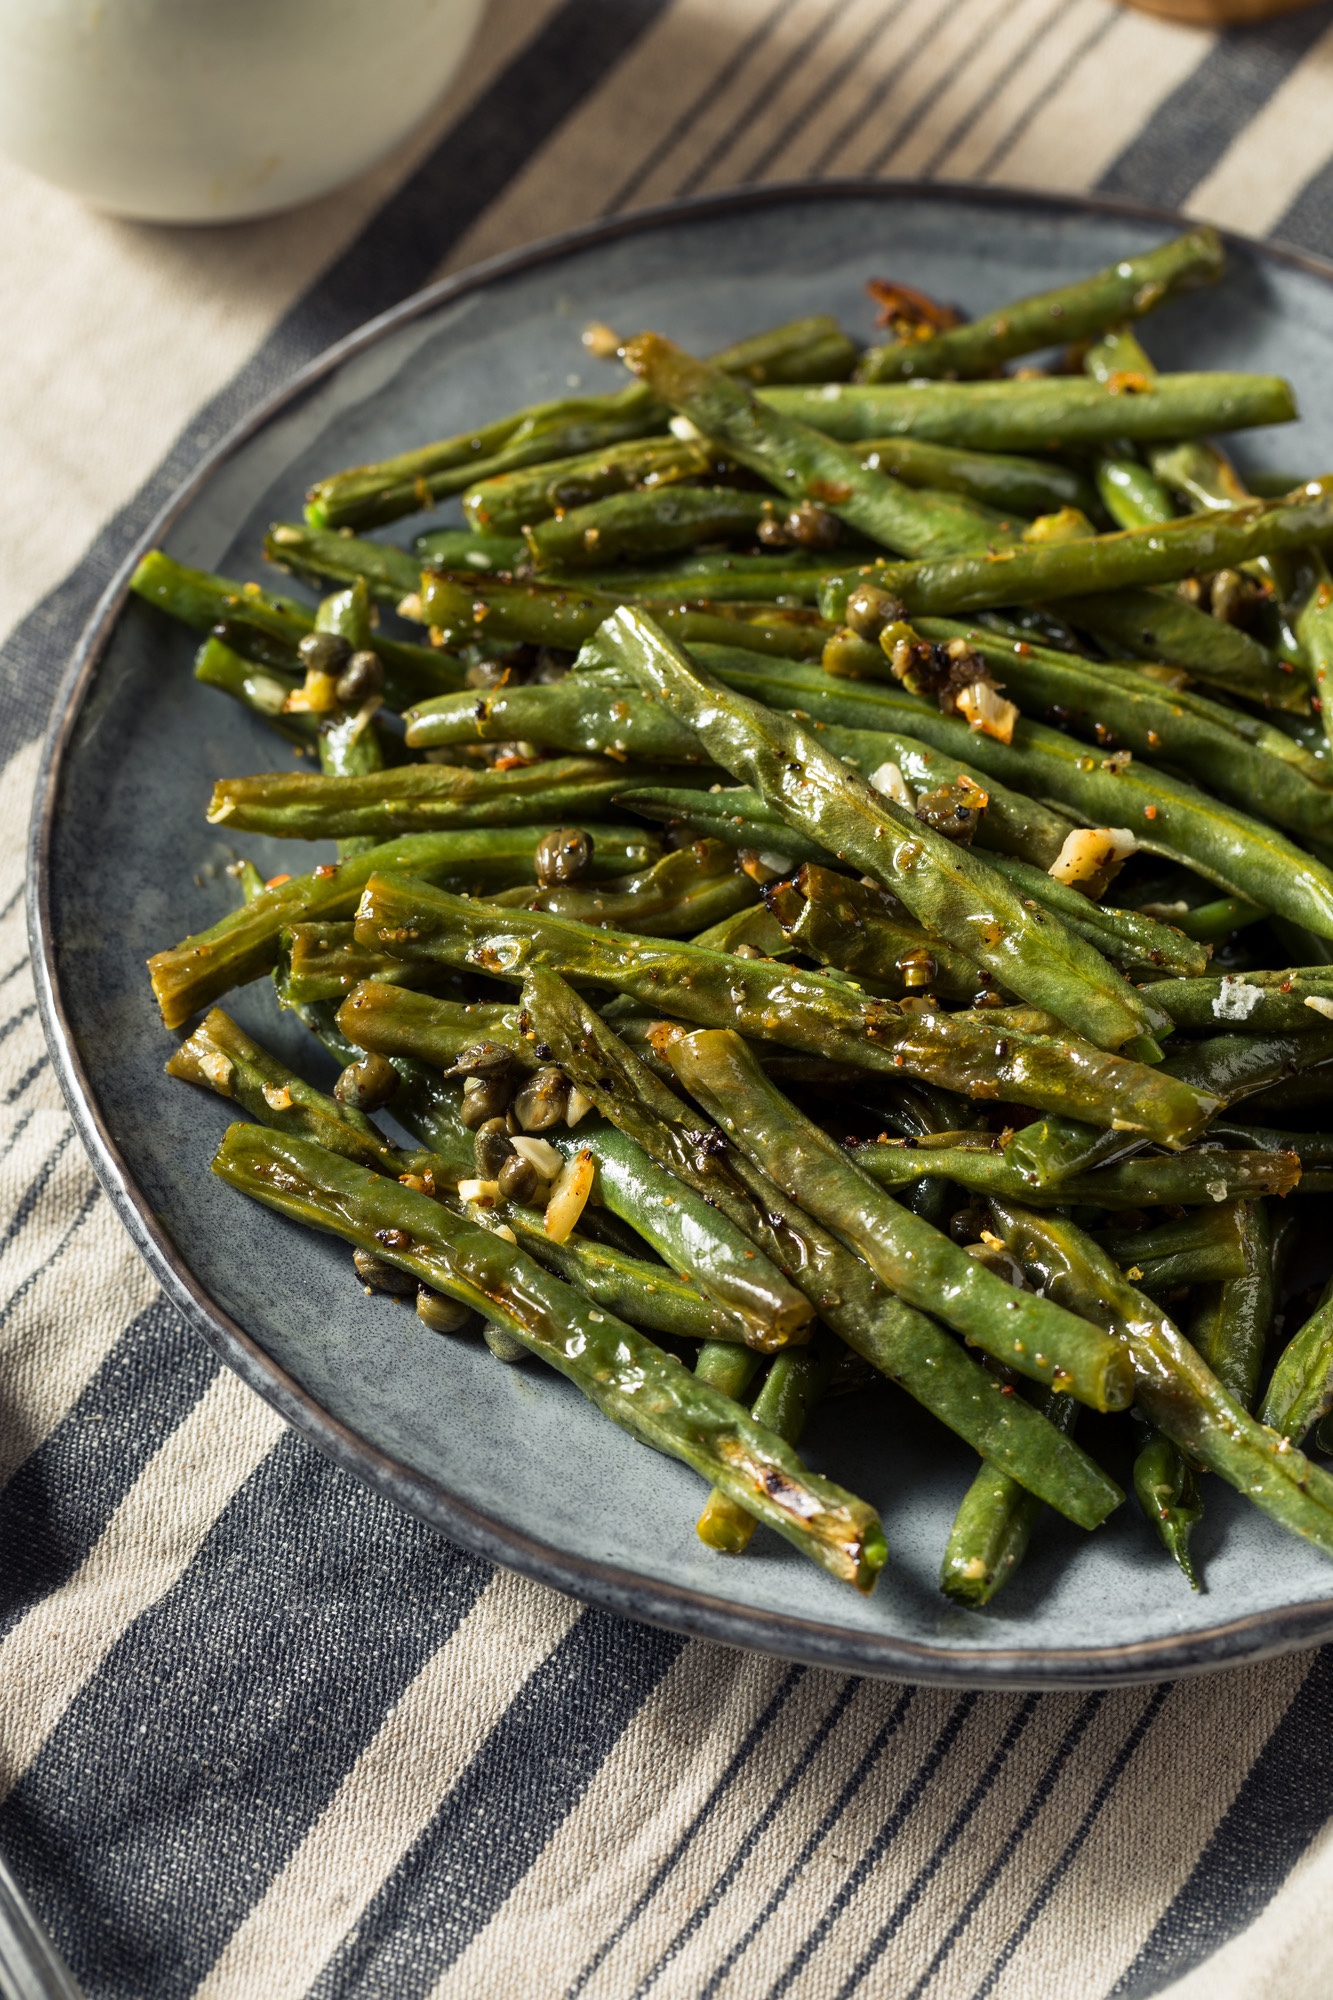 Seasoned cooked green beans in a blue bowl, sitting on a blue and white striped napkin.